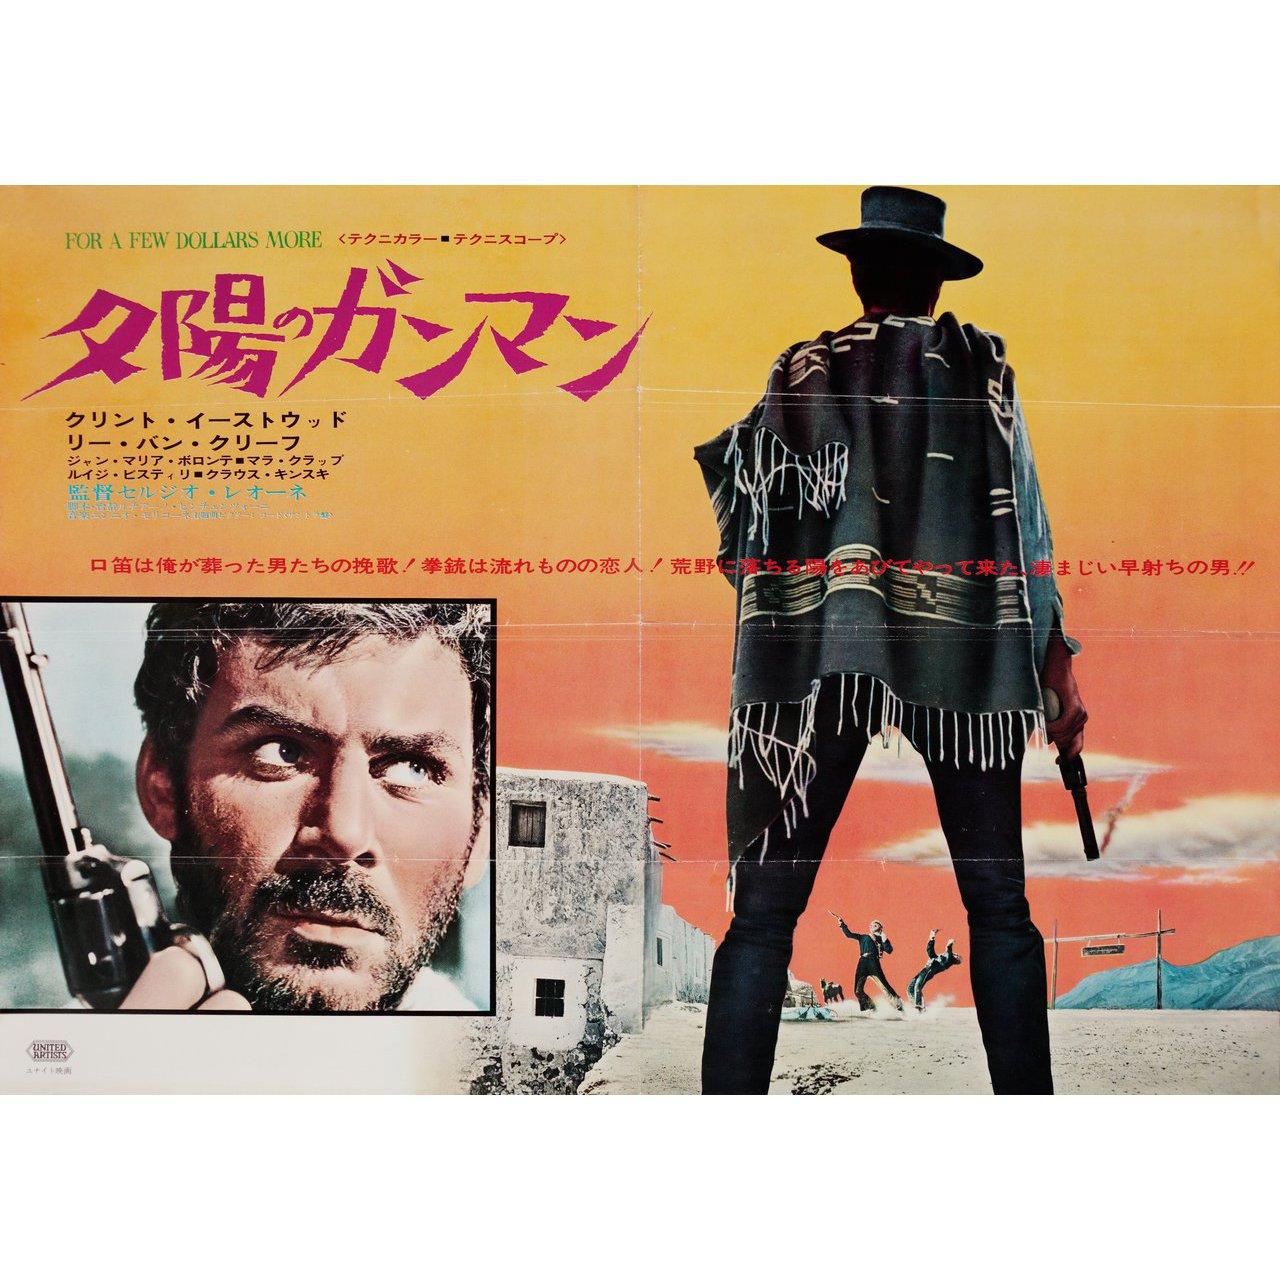 for a few dollars more japanese poster